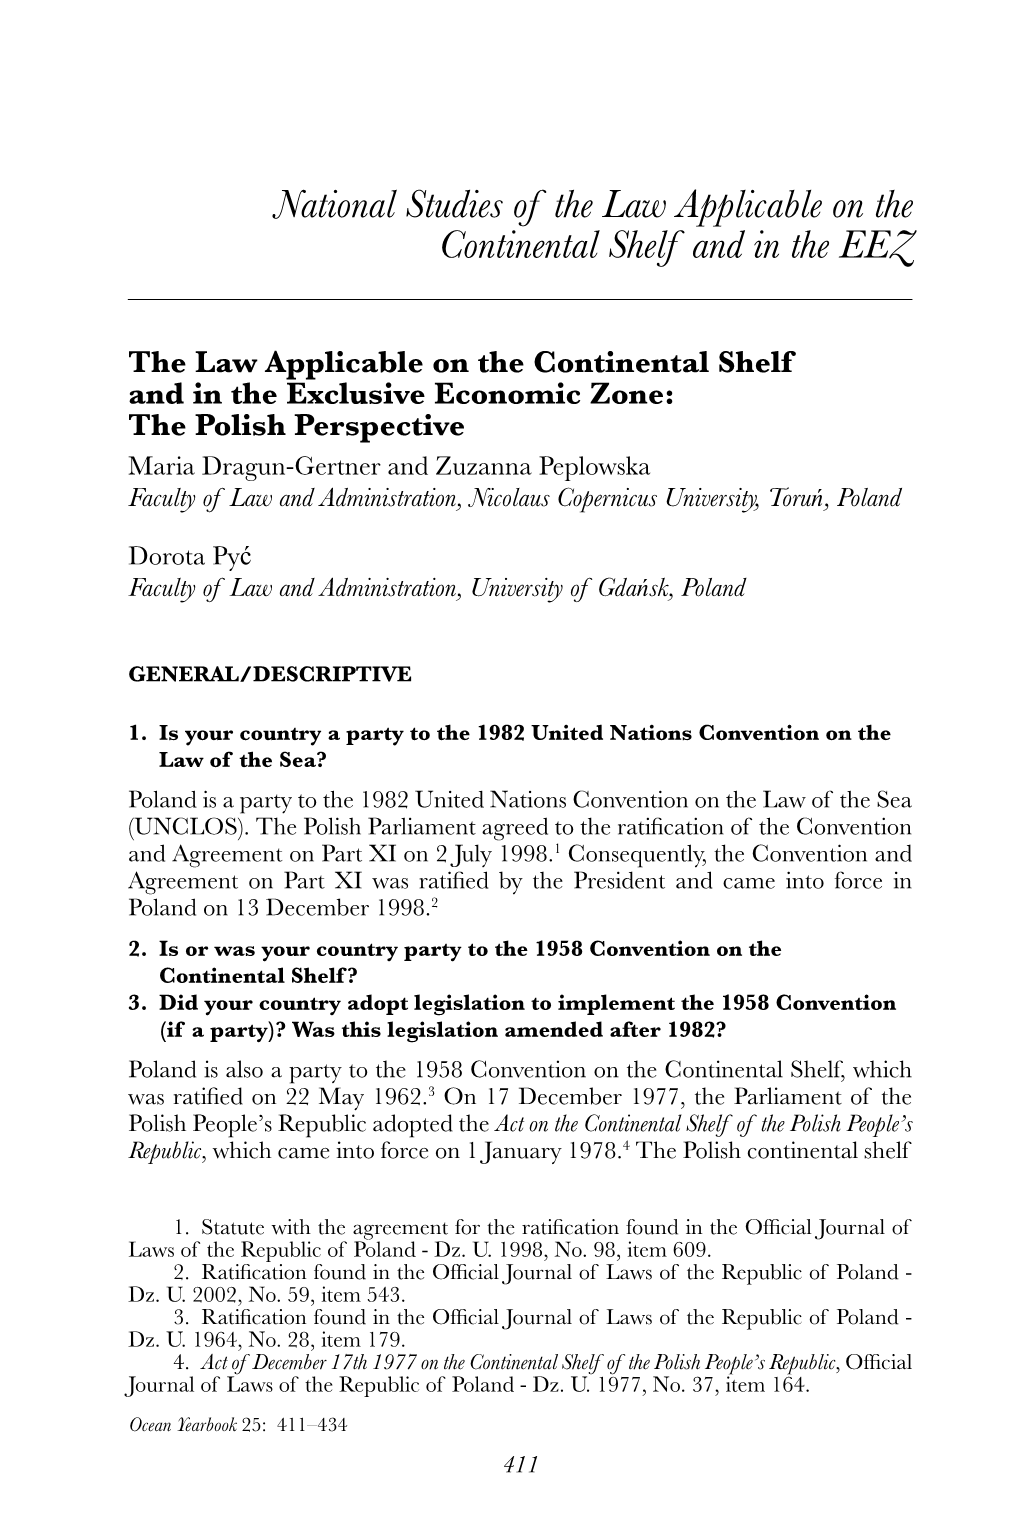 National Studies of the Law Applicable on the Continental Shelf and in the EEZ